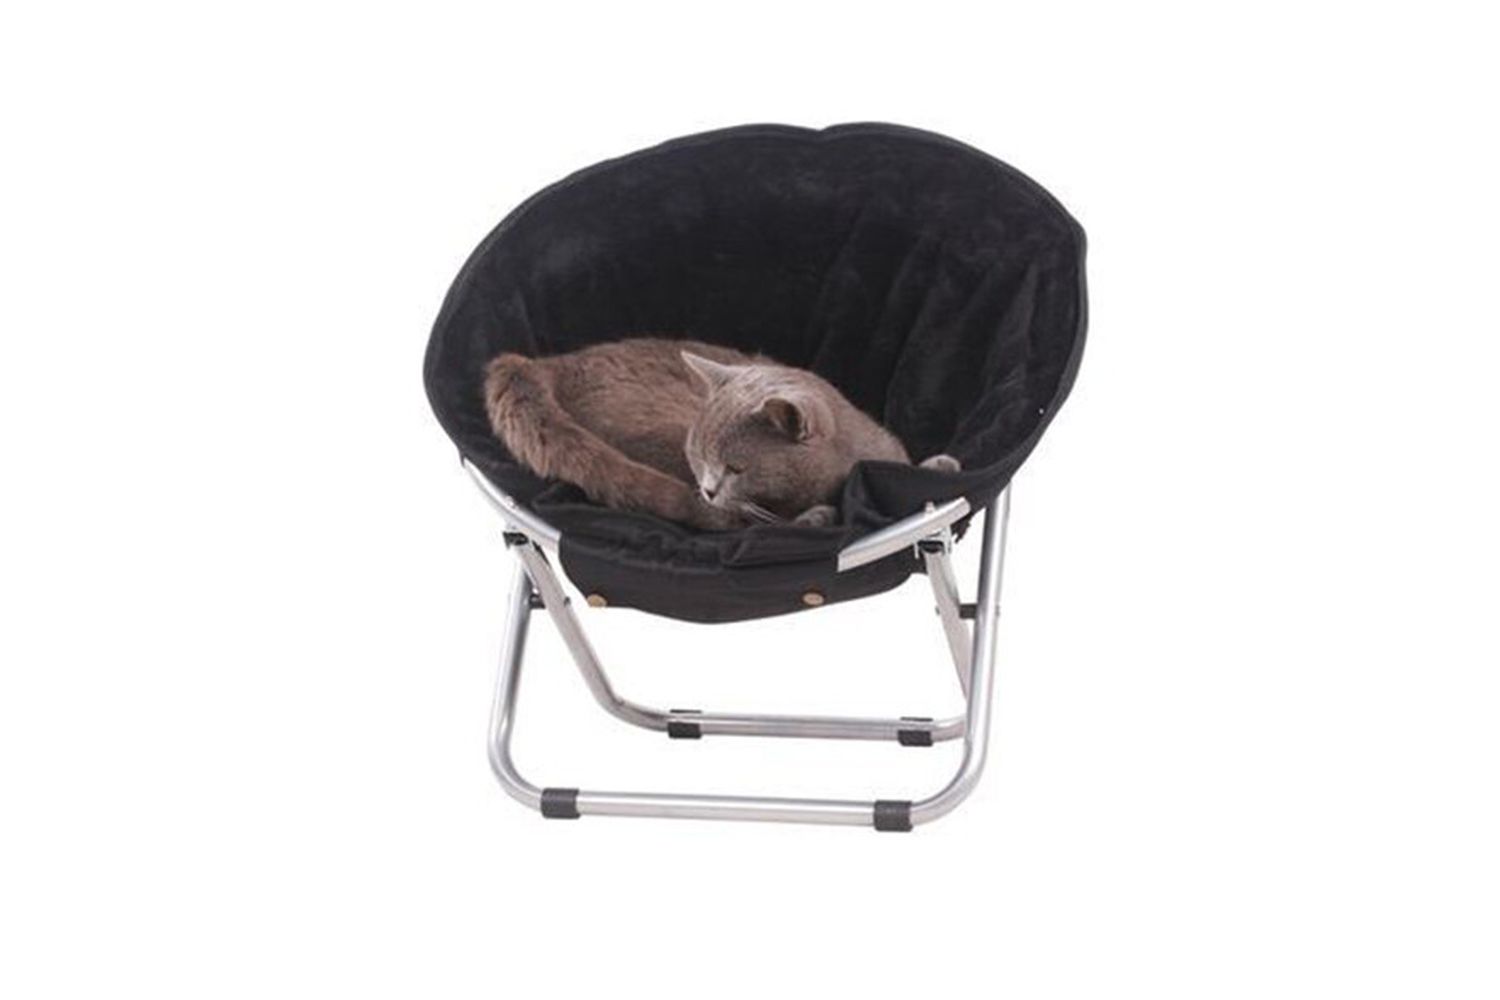 valise trolley chien chat animal domestique - Valise trolley pour chien ou  chat, VavaBid